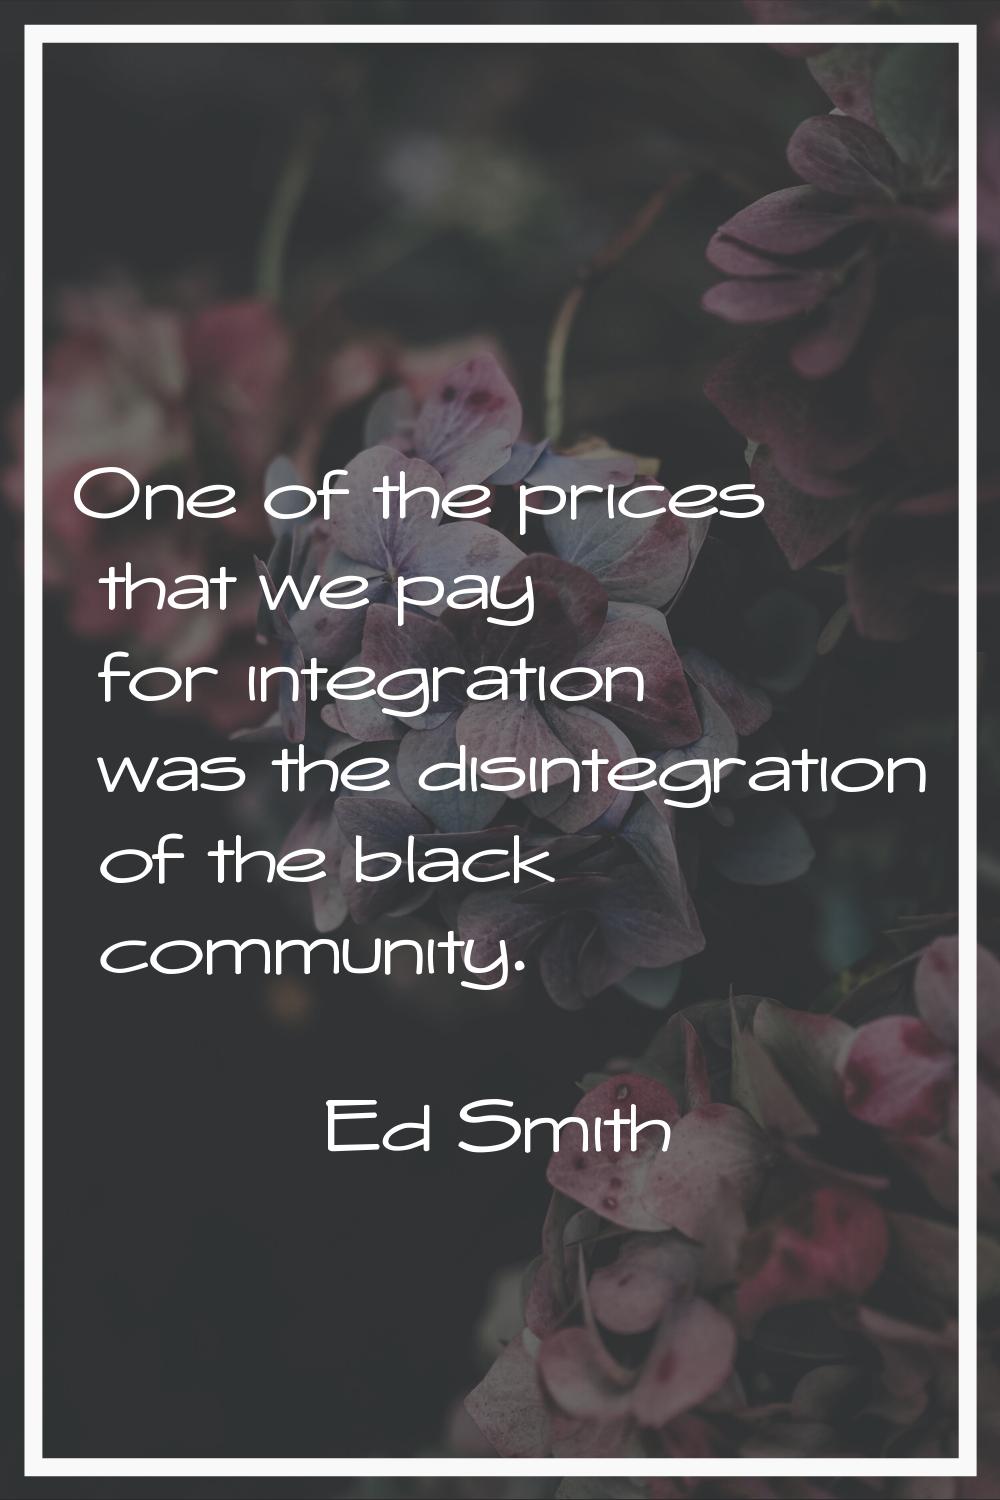 One of the prices that we pay for integration was the disintegration of the black community.